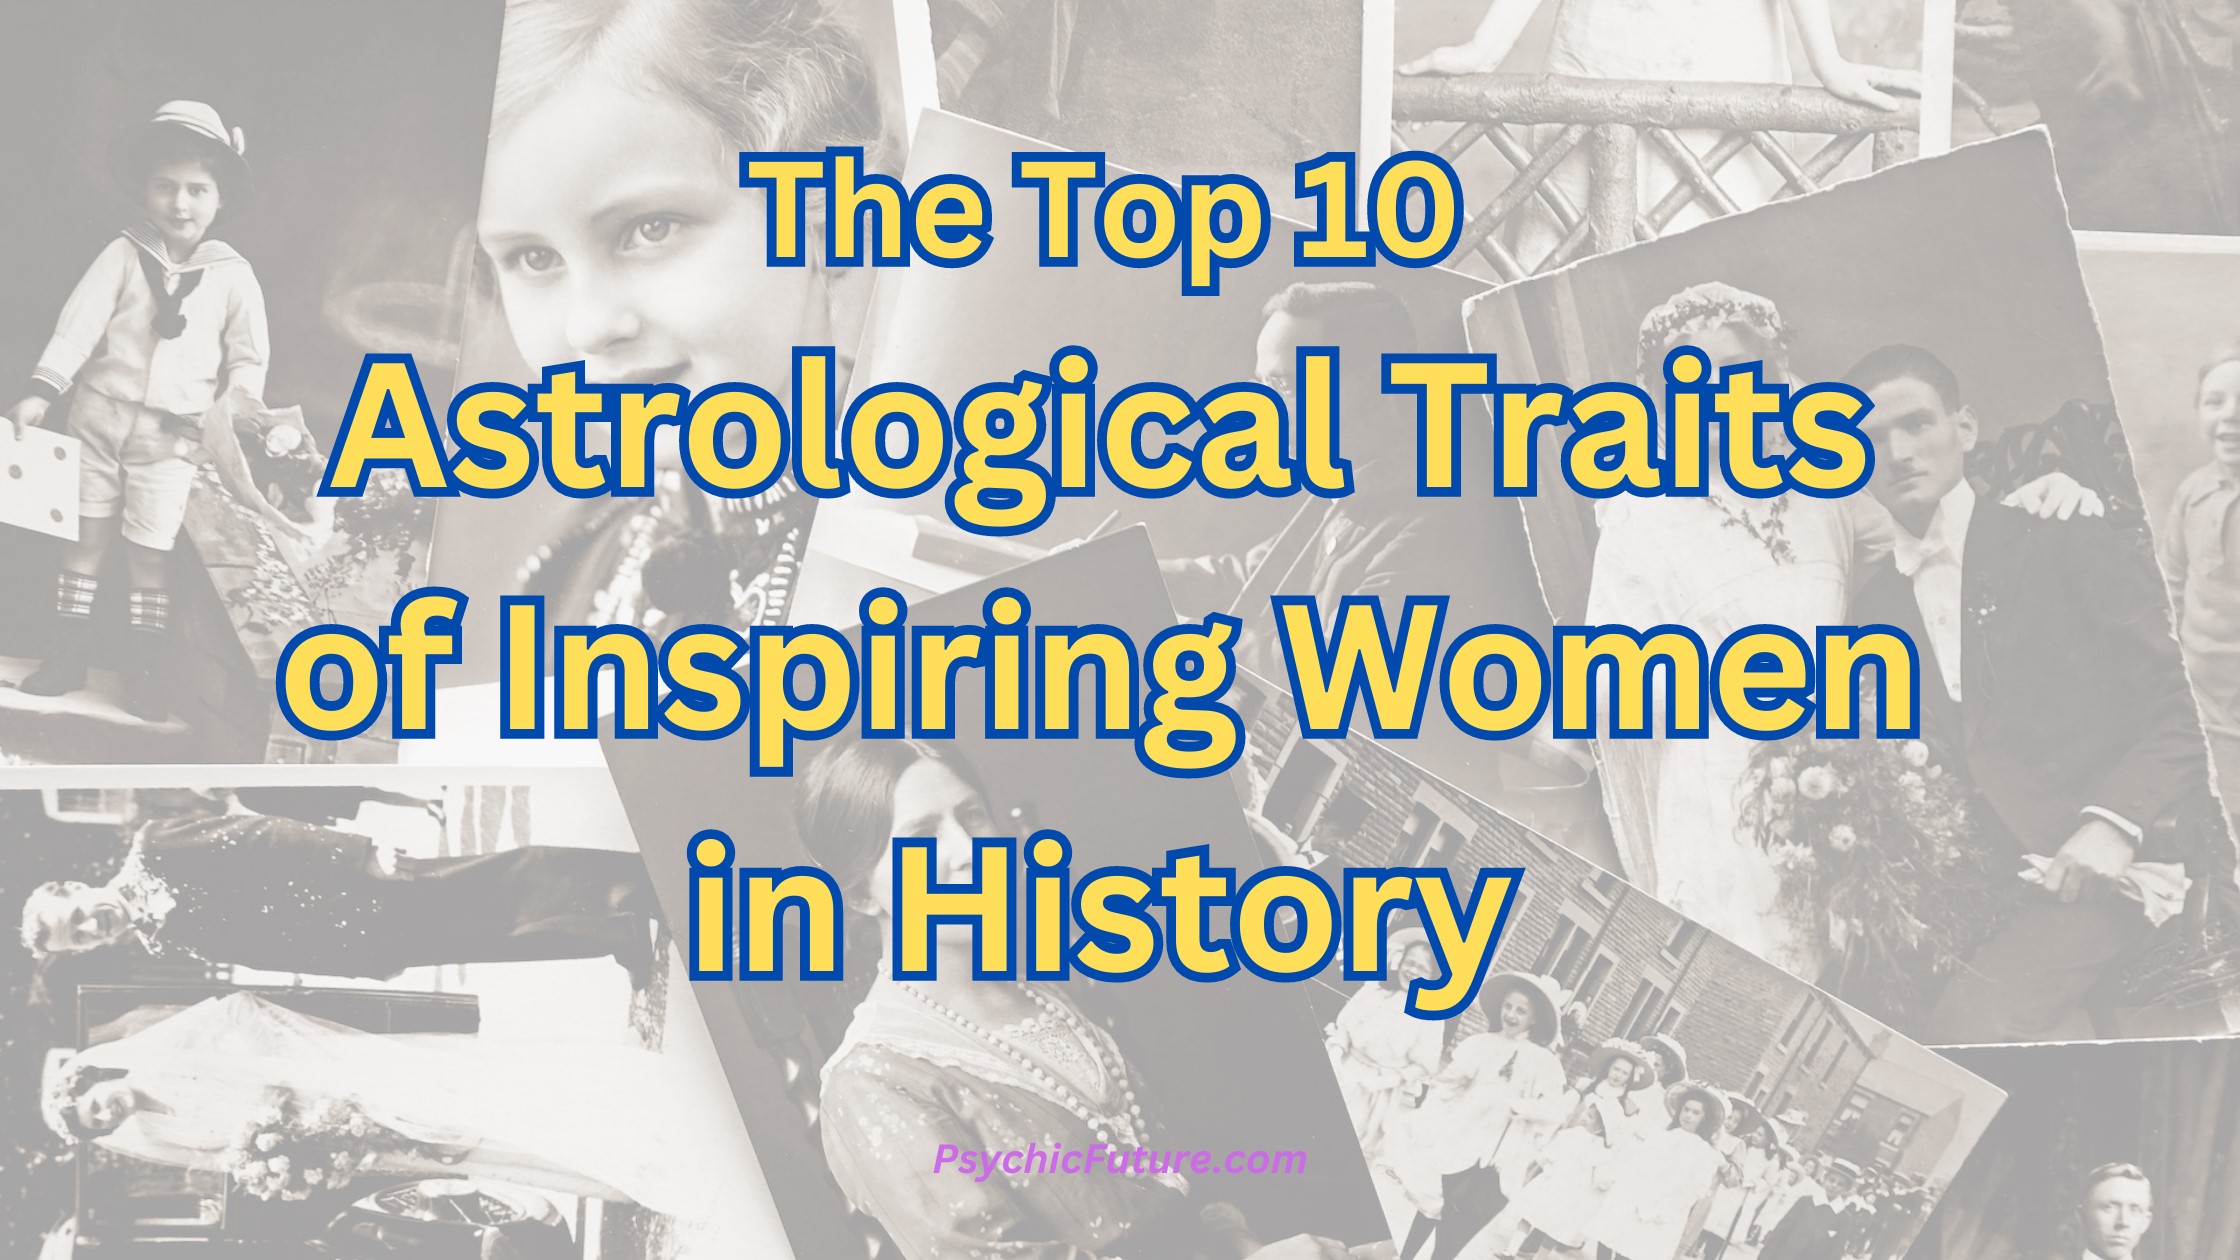 The Top 10 Astrological Traits of Inspiring Women in History